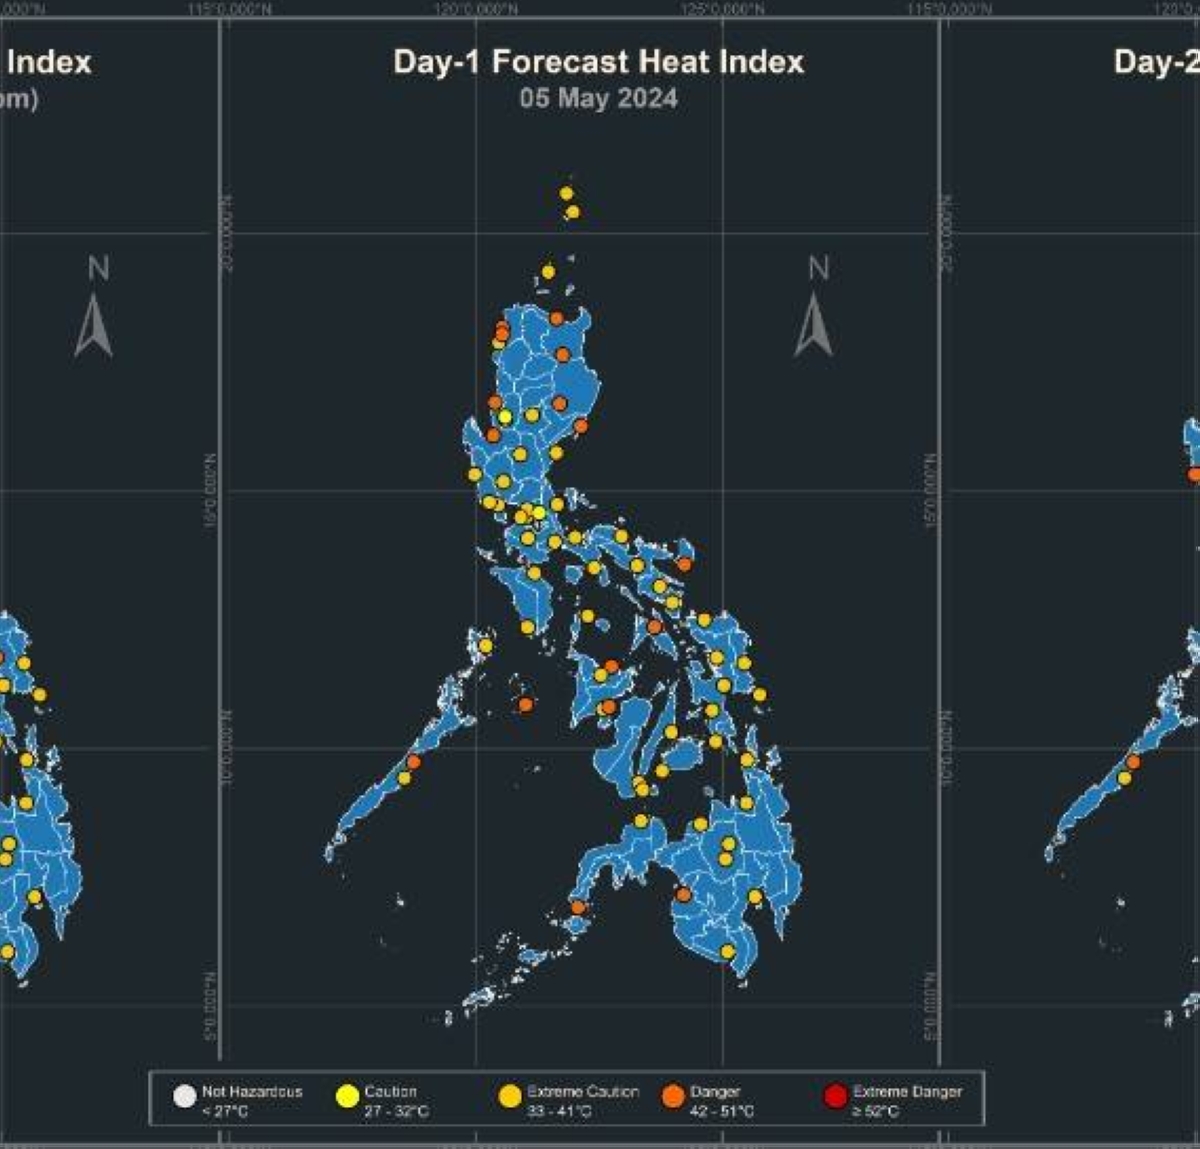 cagayan heat index to hit 48 degrees celsius